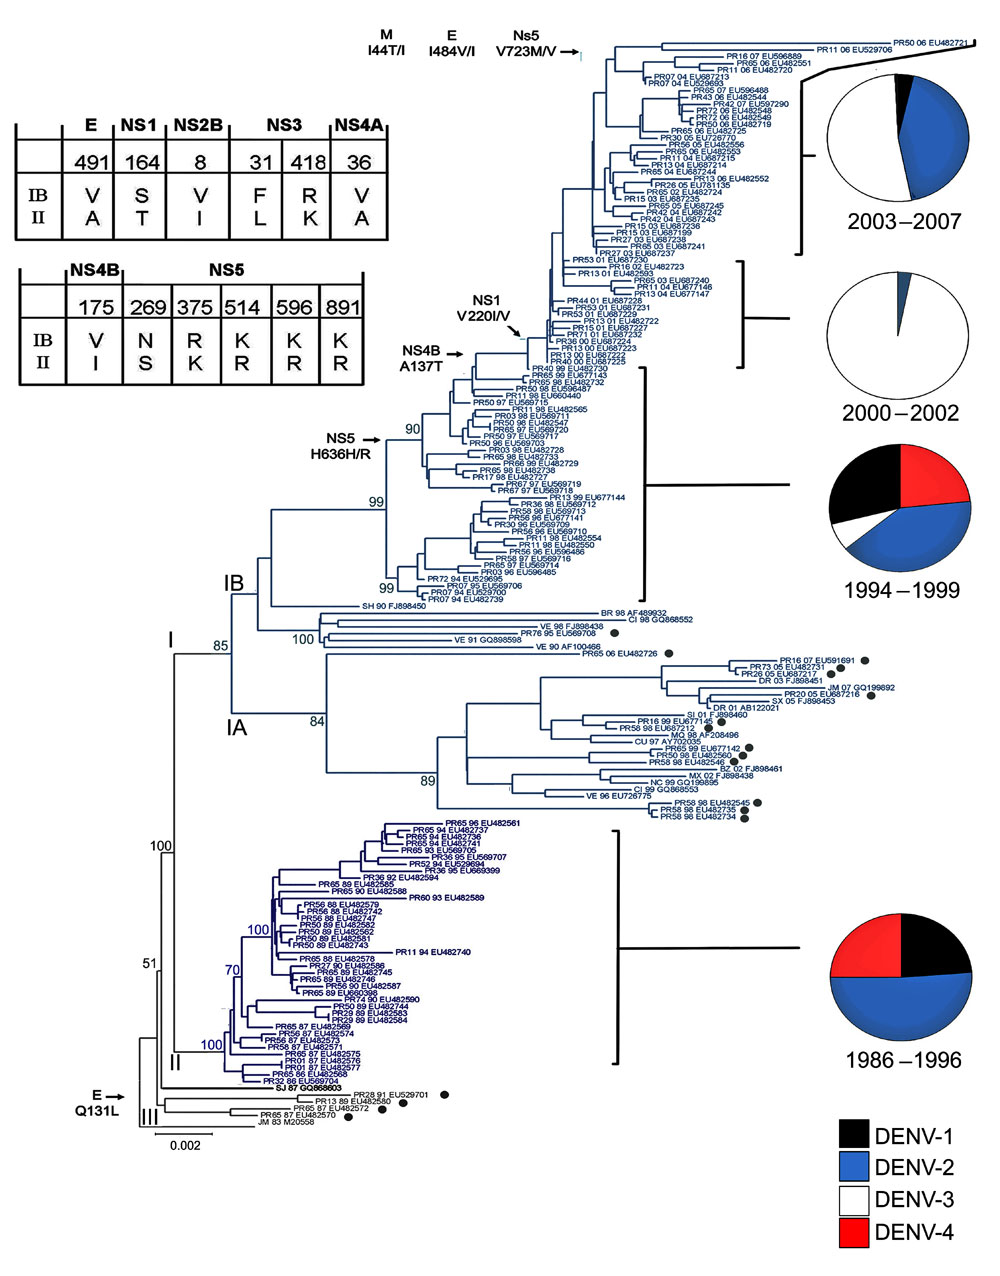 Evolution of dengue virus (DENV) serotype 2, Puerto Rico. Maximum likelihood phylogeny of the 140 Puerto Rico and 20 international isolates of DENV-2 (see number of isolates by year below). Names of clades (I, II, and III) and subclades (IA, IB) are shown at the base of their respective branches on the phylogeny tree. Clade II (dark blue) circulated during 1986–1996 and clade I (light blue) during 1994–2007. Subclade IA and clade III represent foreign, transient reintroductions throughout the 22